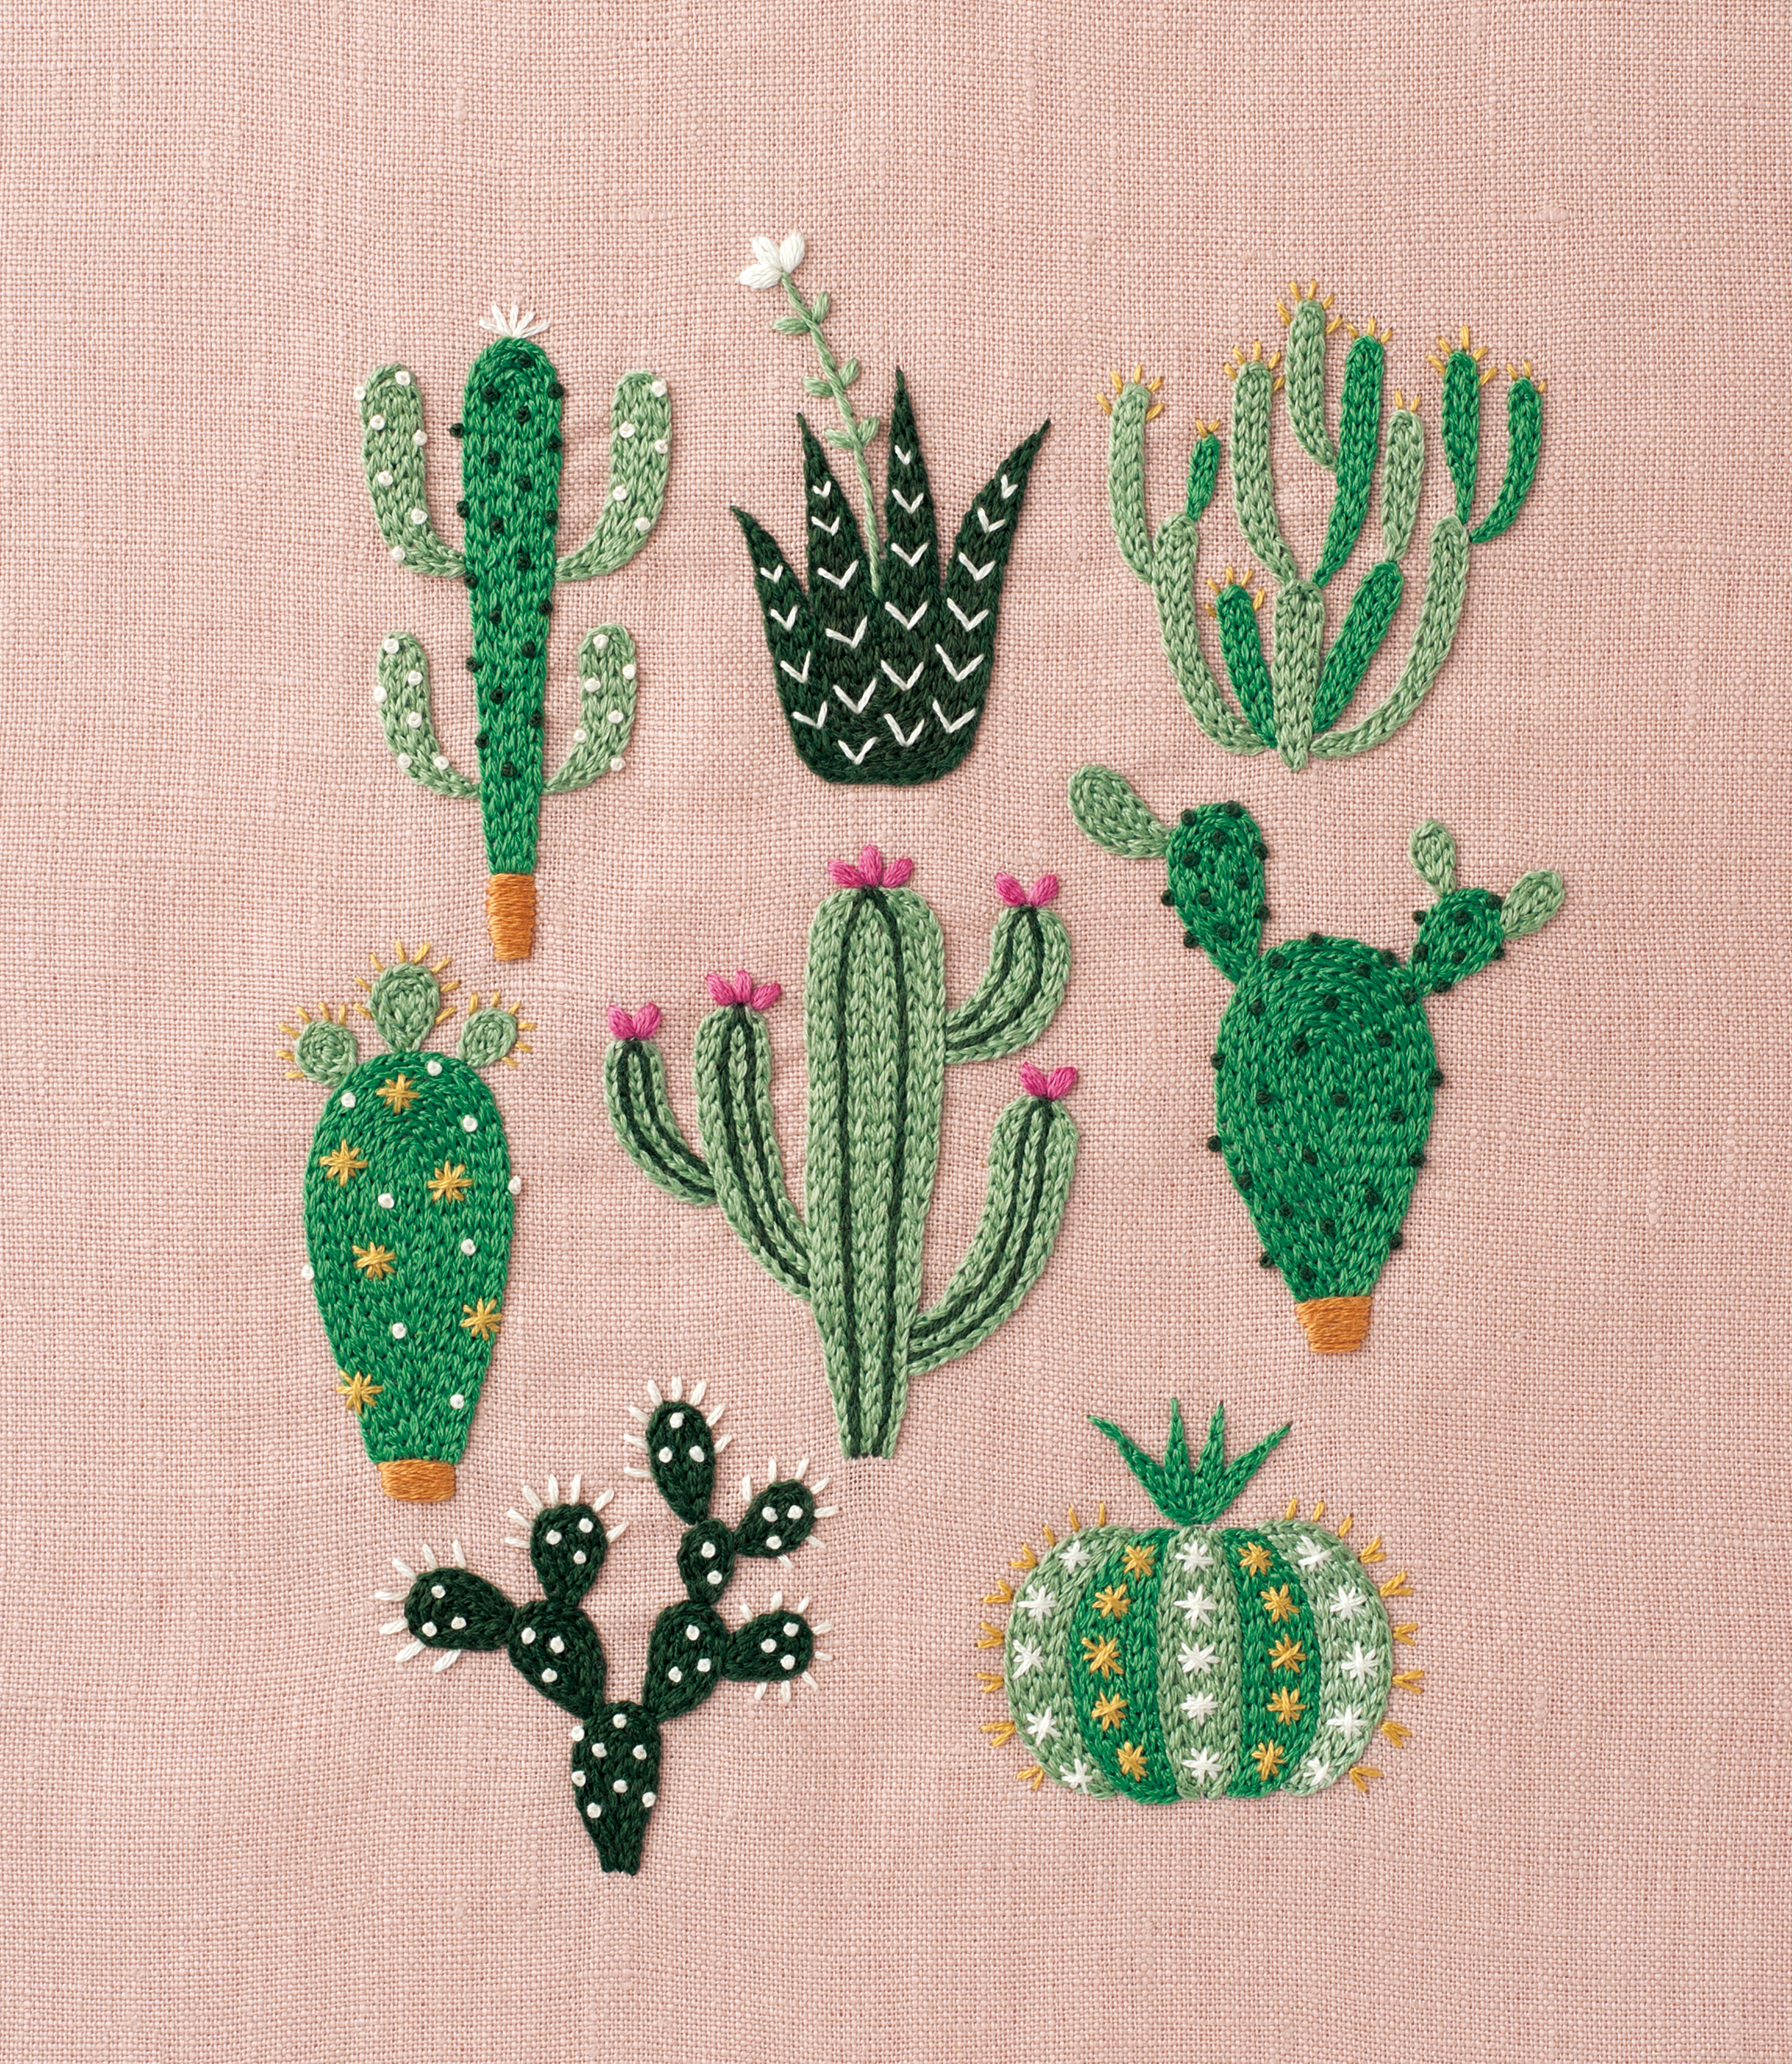 Paper Embroidery Patterns Free Diy Floral Cactus Embroidery Projects From A Year Of Embroidery